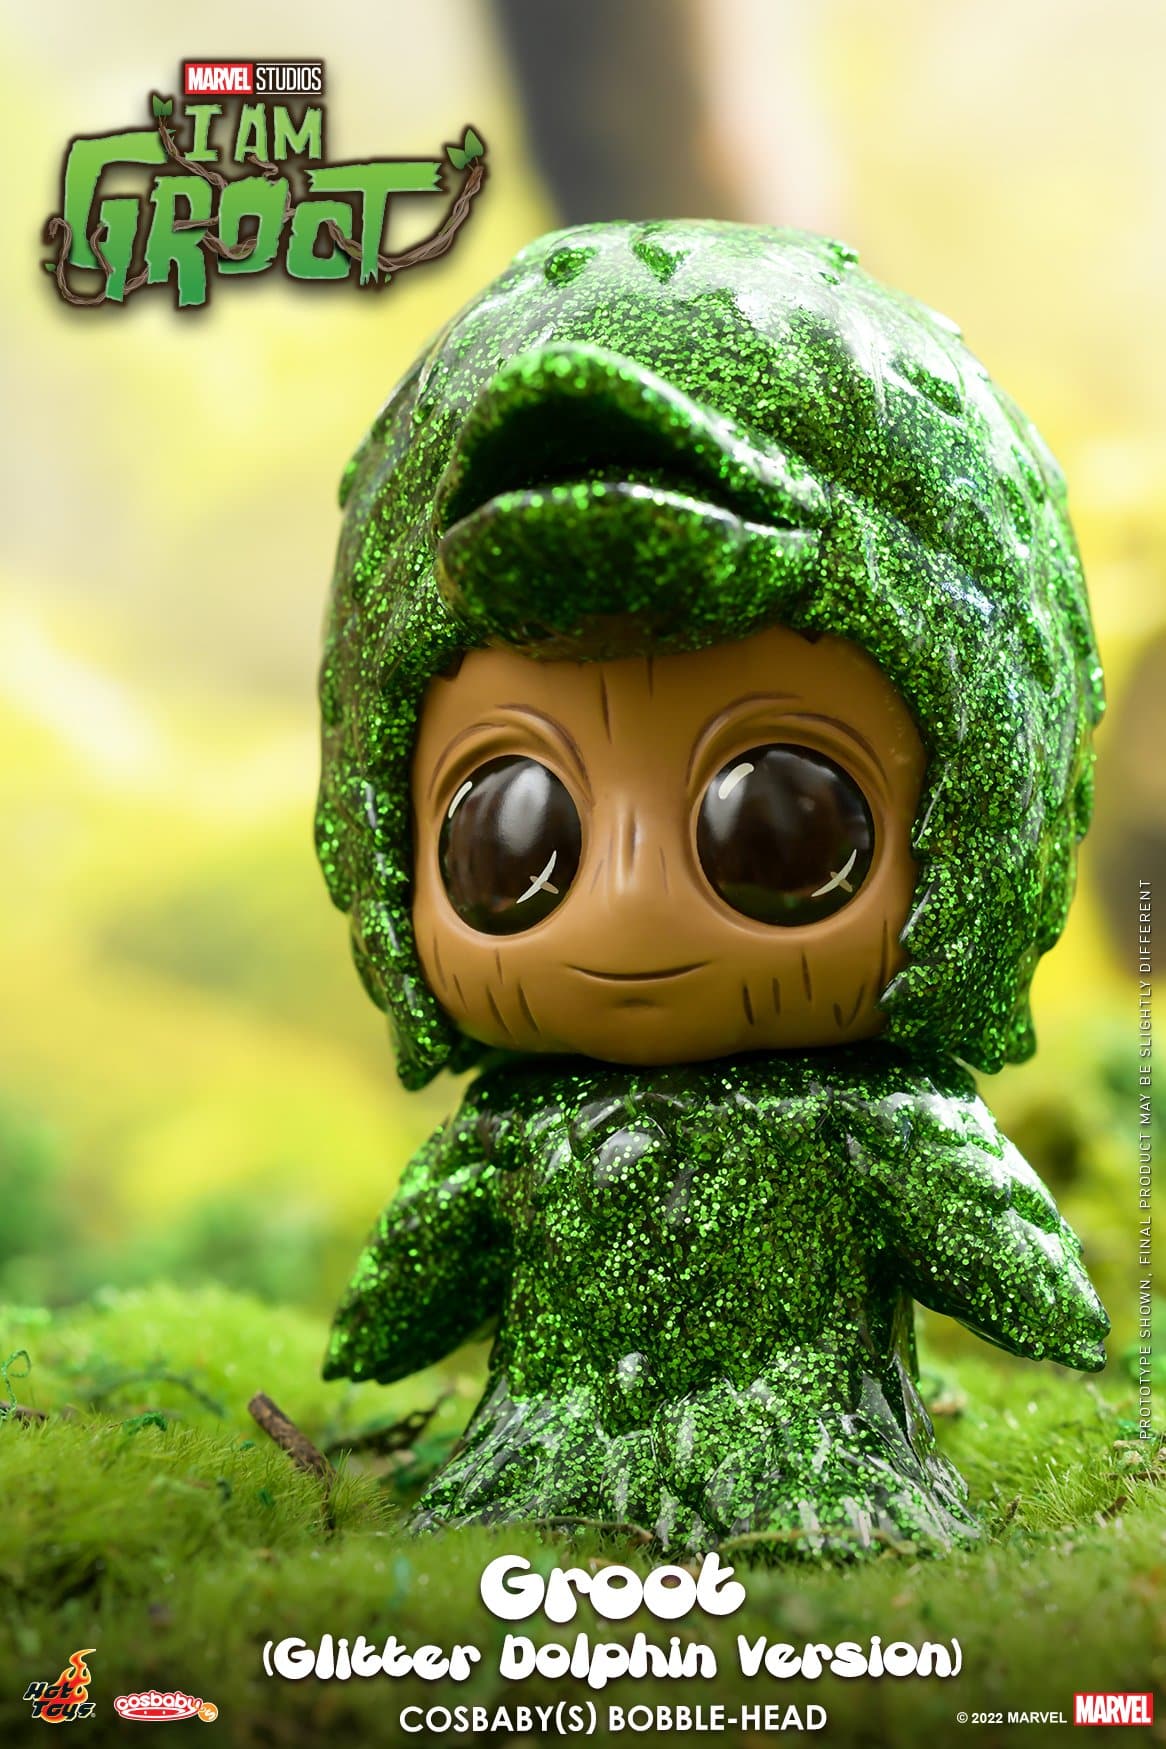 primer vistazo a «i am groot» hot toys cosbaby’s